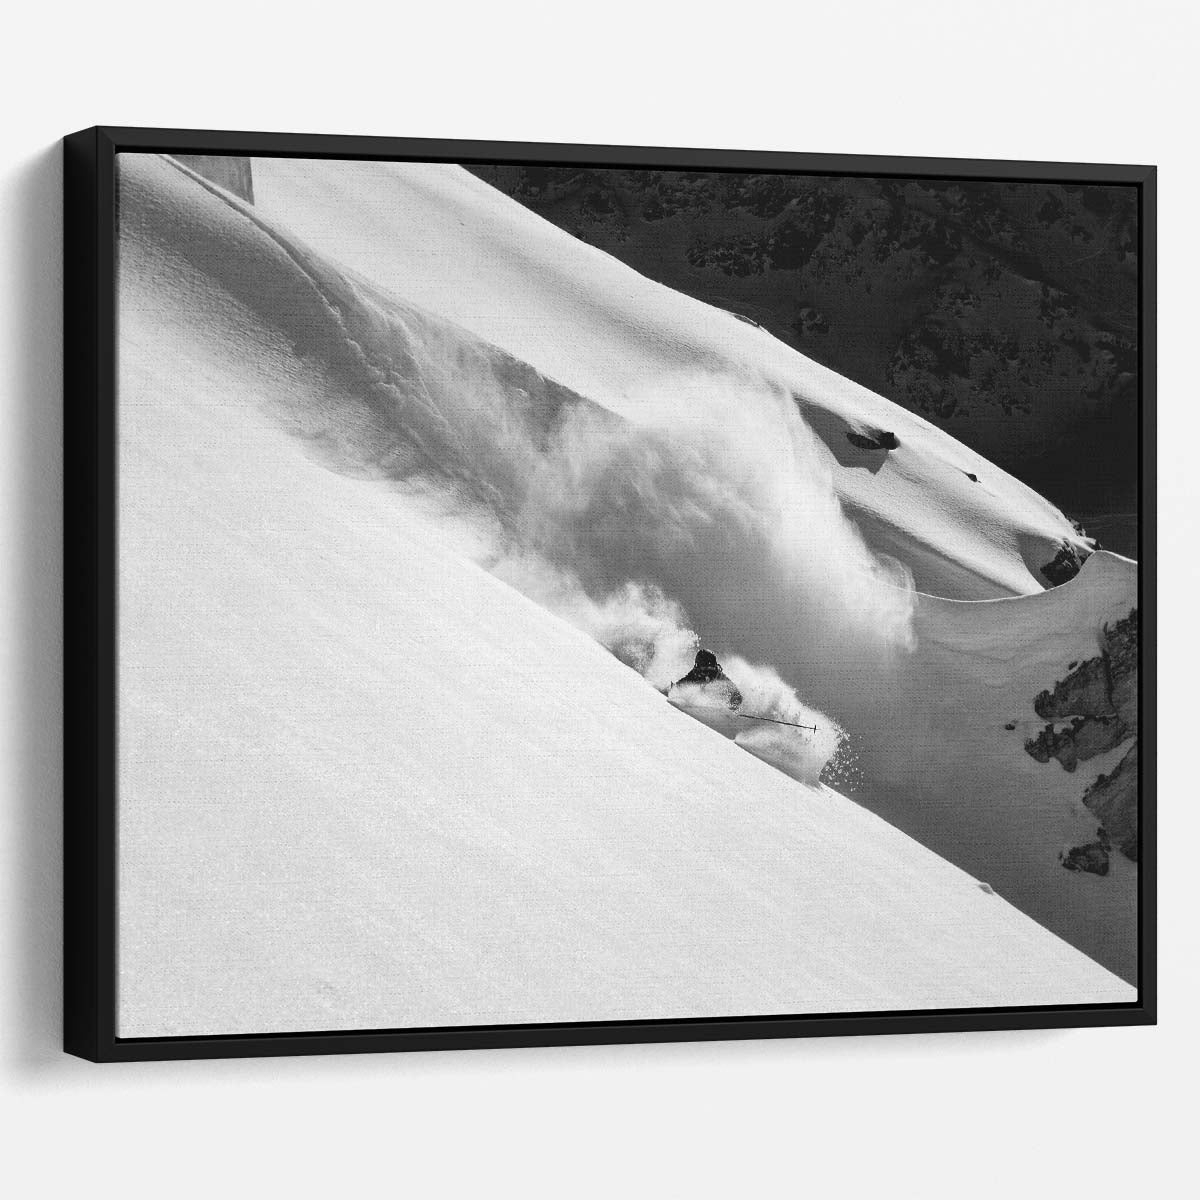 Explosive Freeride Skiing in Swiss Alps Wall Art by Luxuriance Designs. Made in USA.